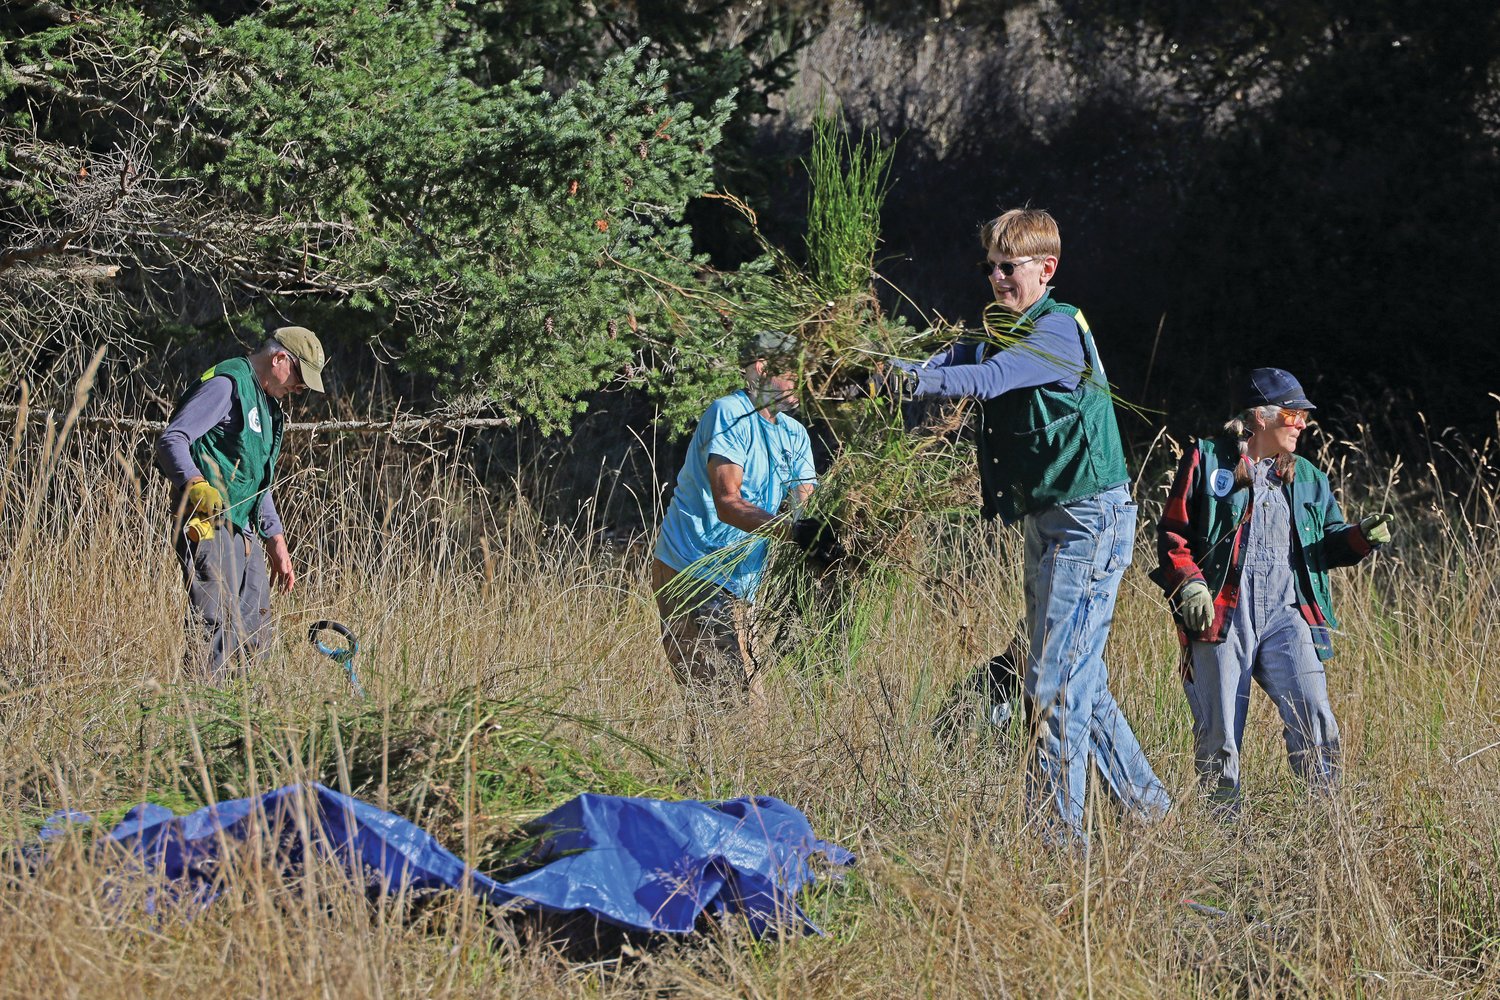 Volunteers pull scotch broom from where Garry Oaks will be planted in early December.